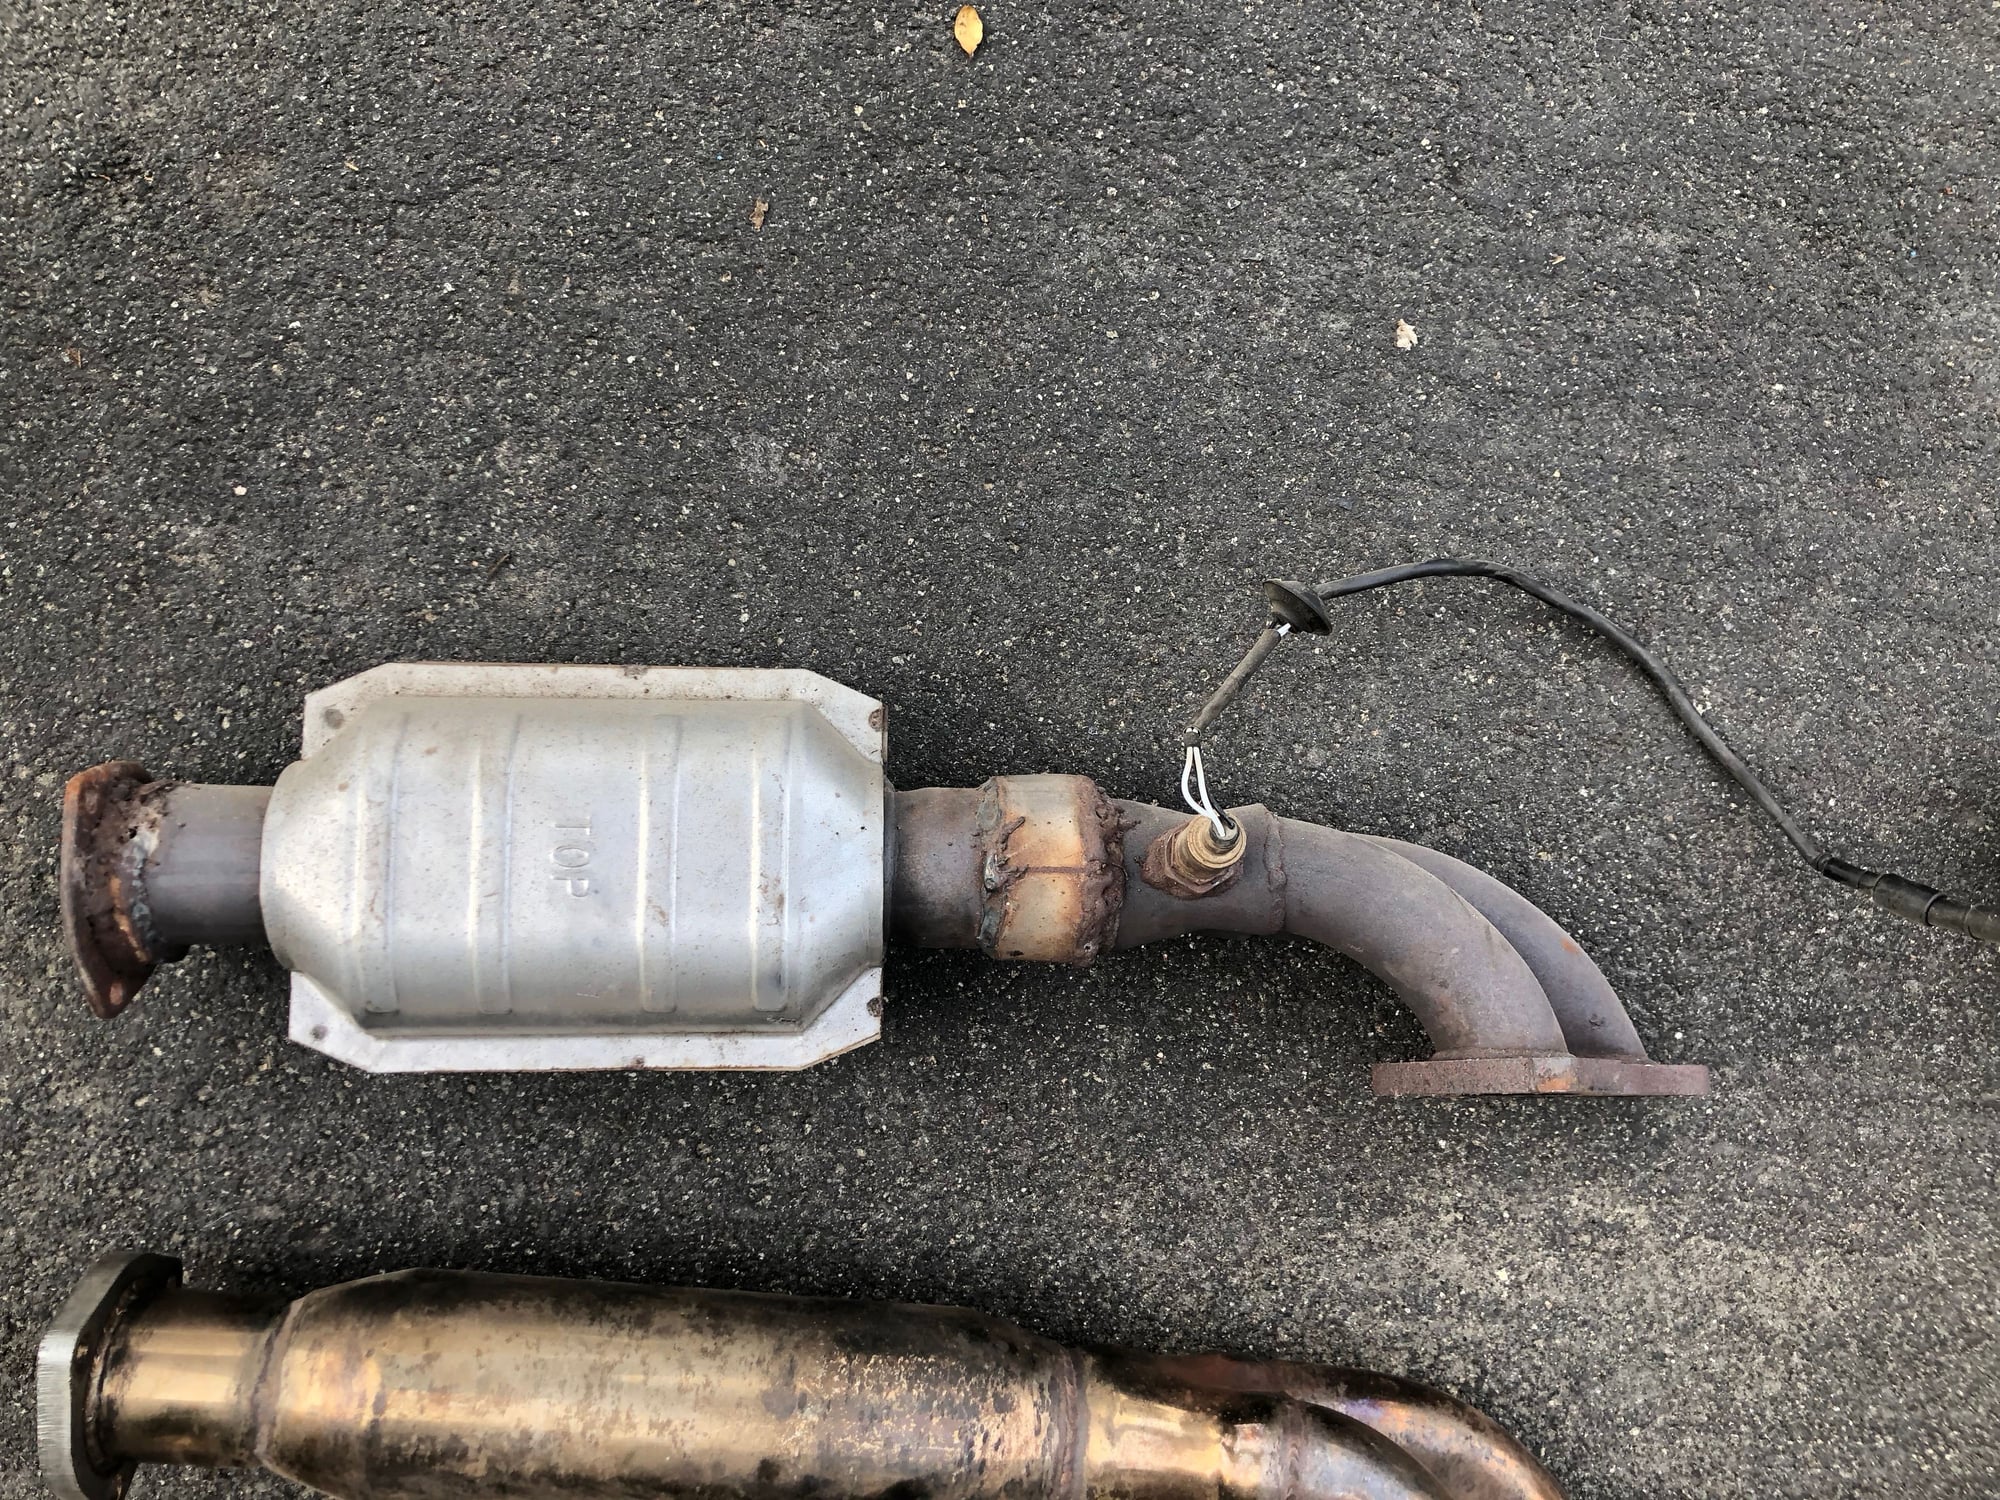 Engine - Exhaust - 3.2 parts.  Complete exhaust, cat bypass, intake, steering wheel. - Used - 1984 to 1989 Porsche 911 - Los Angeles, CA 90039, United States